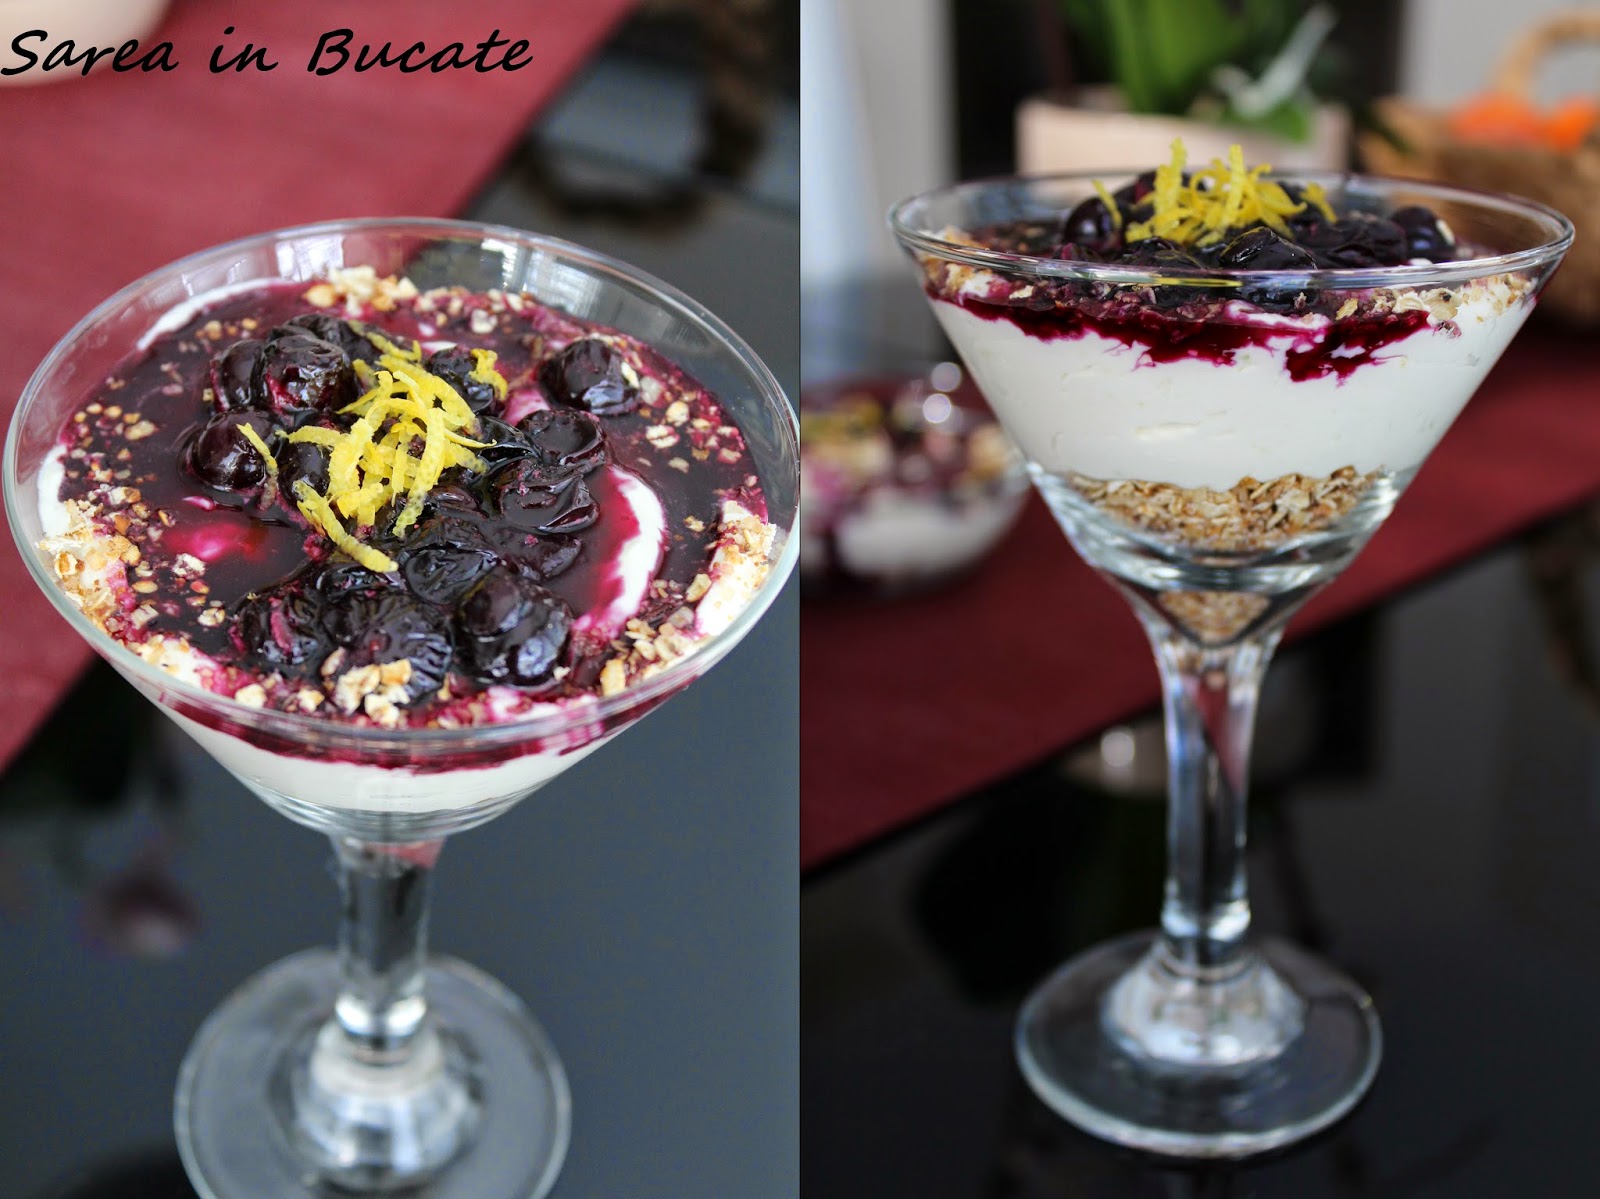 Cheesecake la pahar cu lime si afine / Blueberry and lime cheesecake